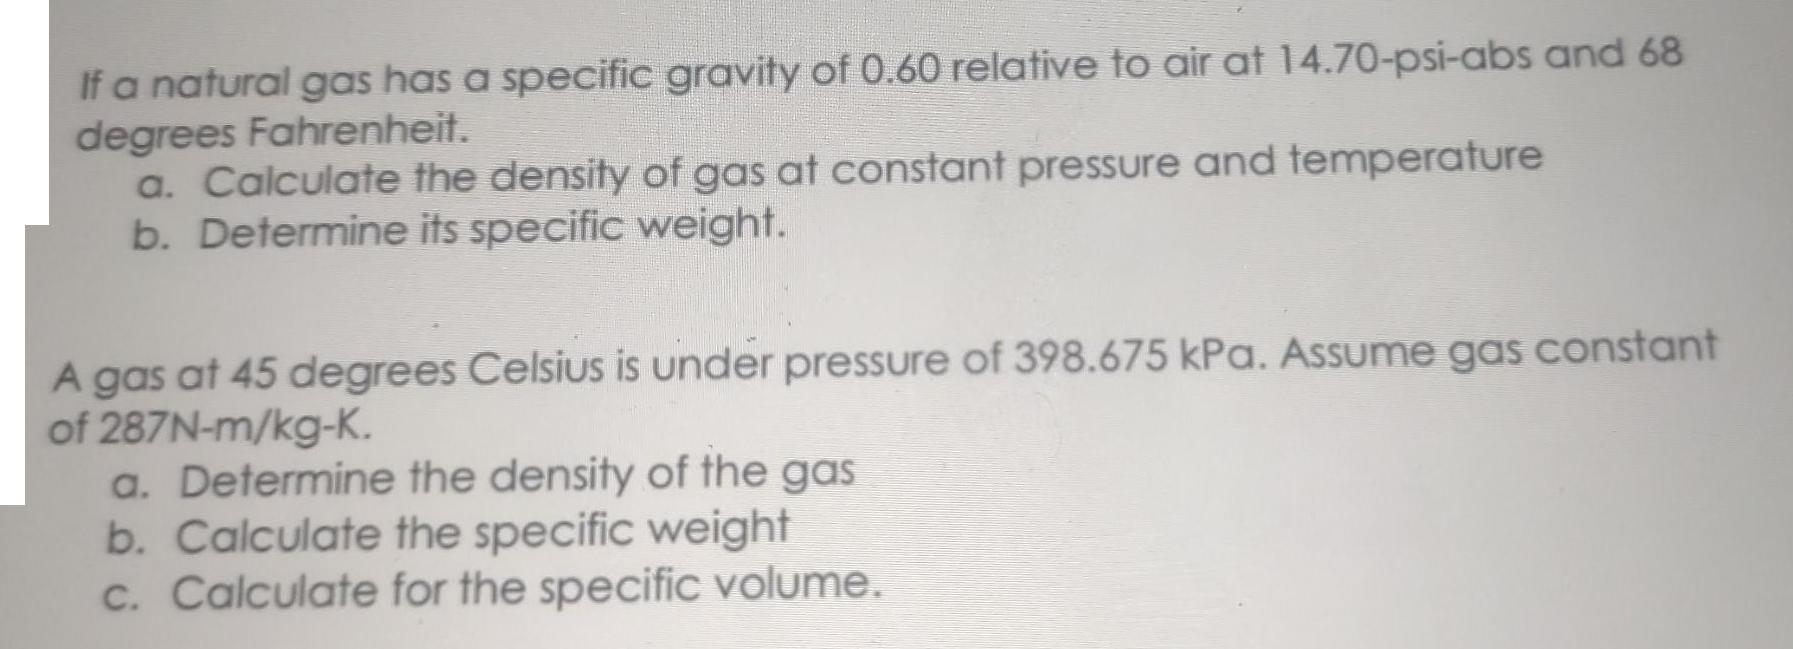 If a natural gas has a specific gravity of 0.60 relative to air at 14.70-psi-abs and 68 degrees Fahrenheit.